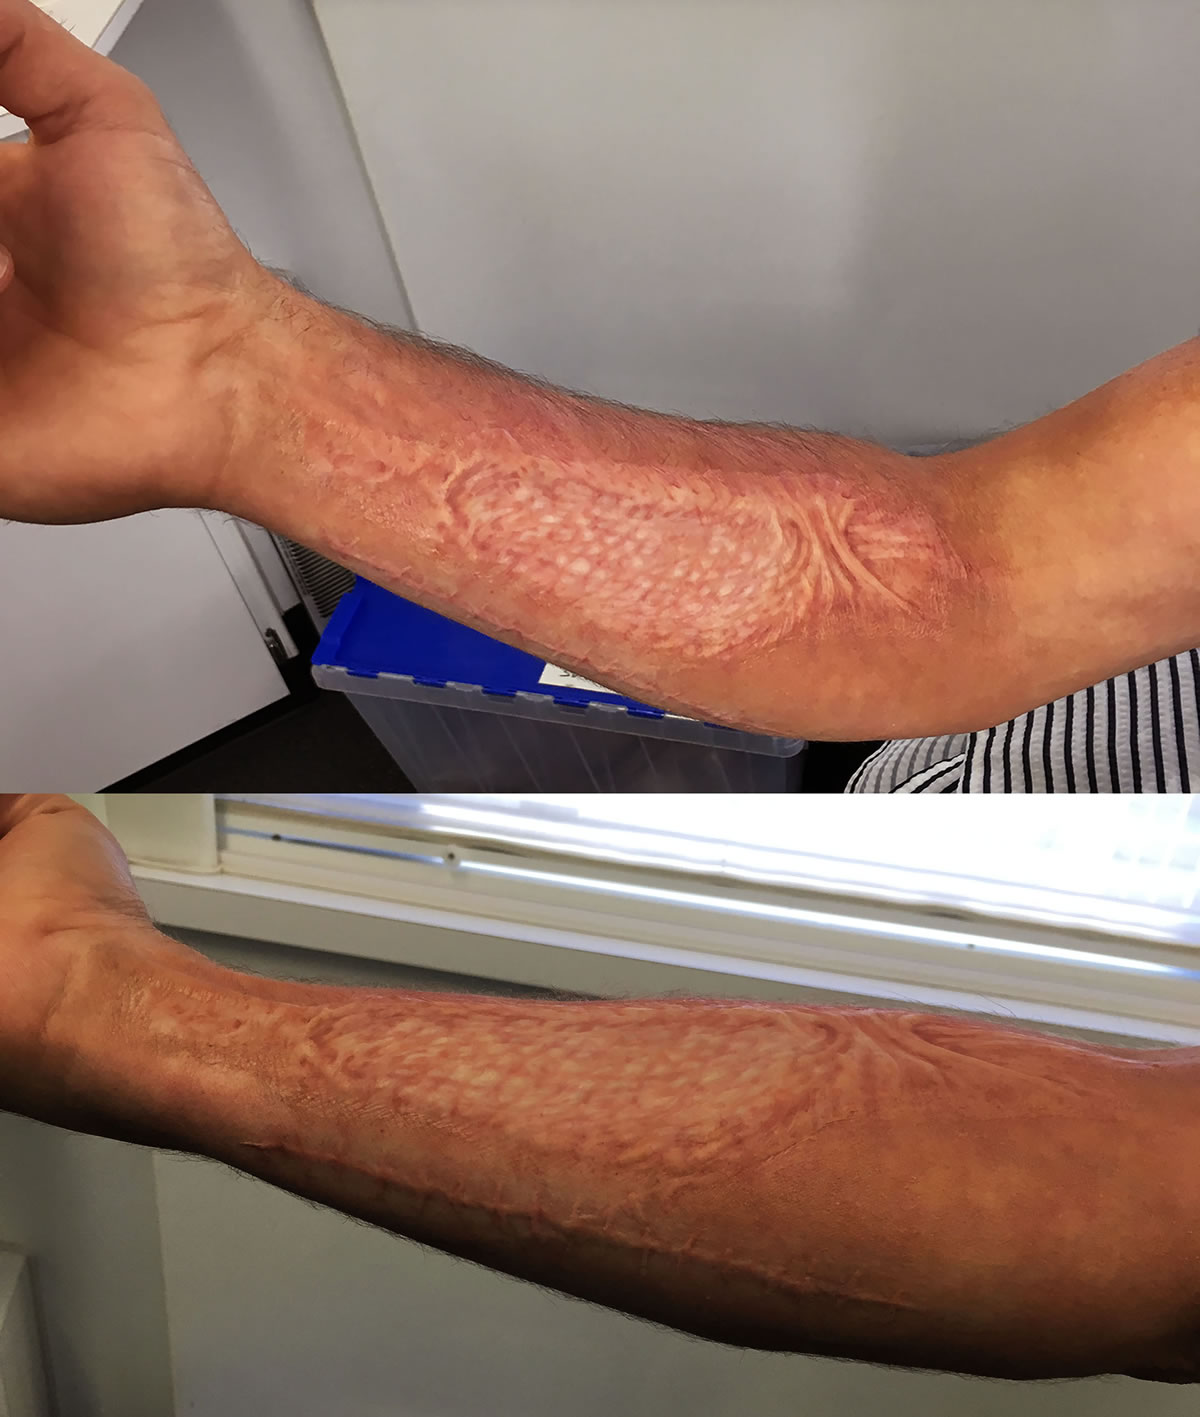 Skin graft appliances for the series 'NCIS-Los Angeles'